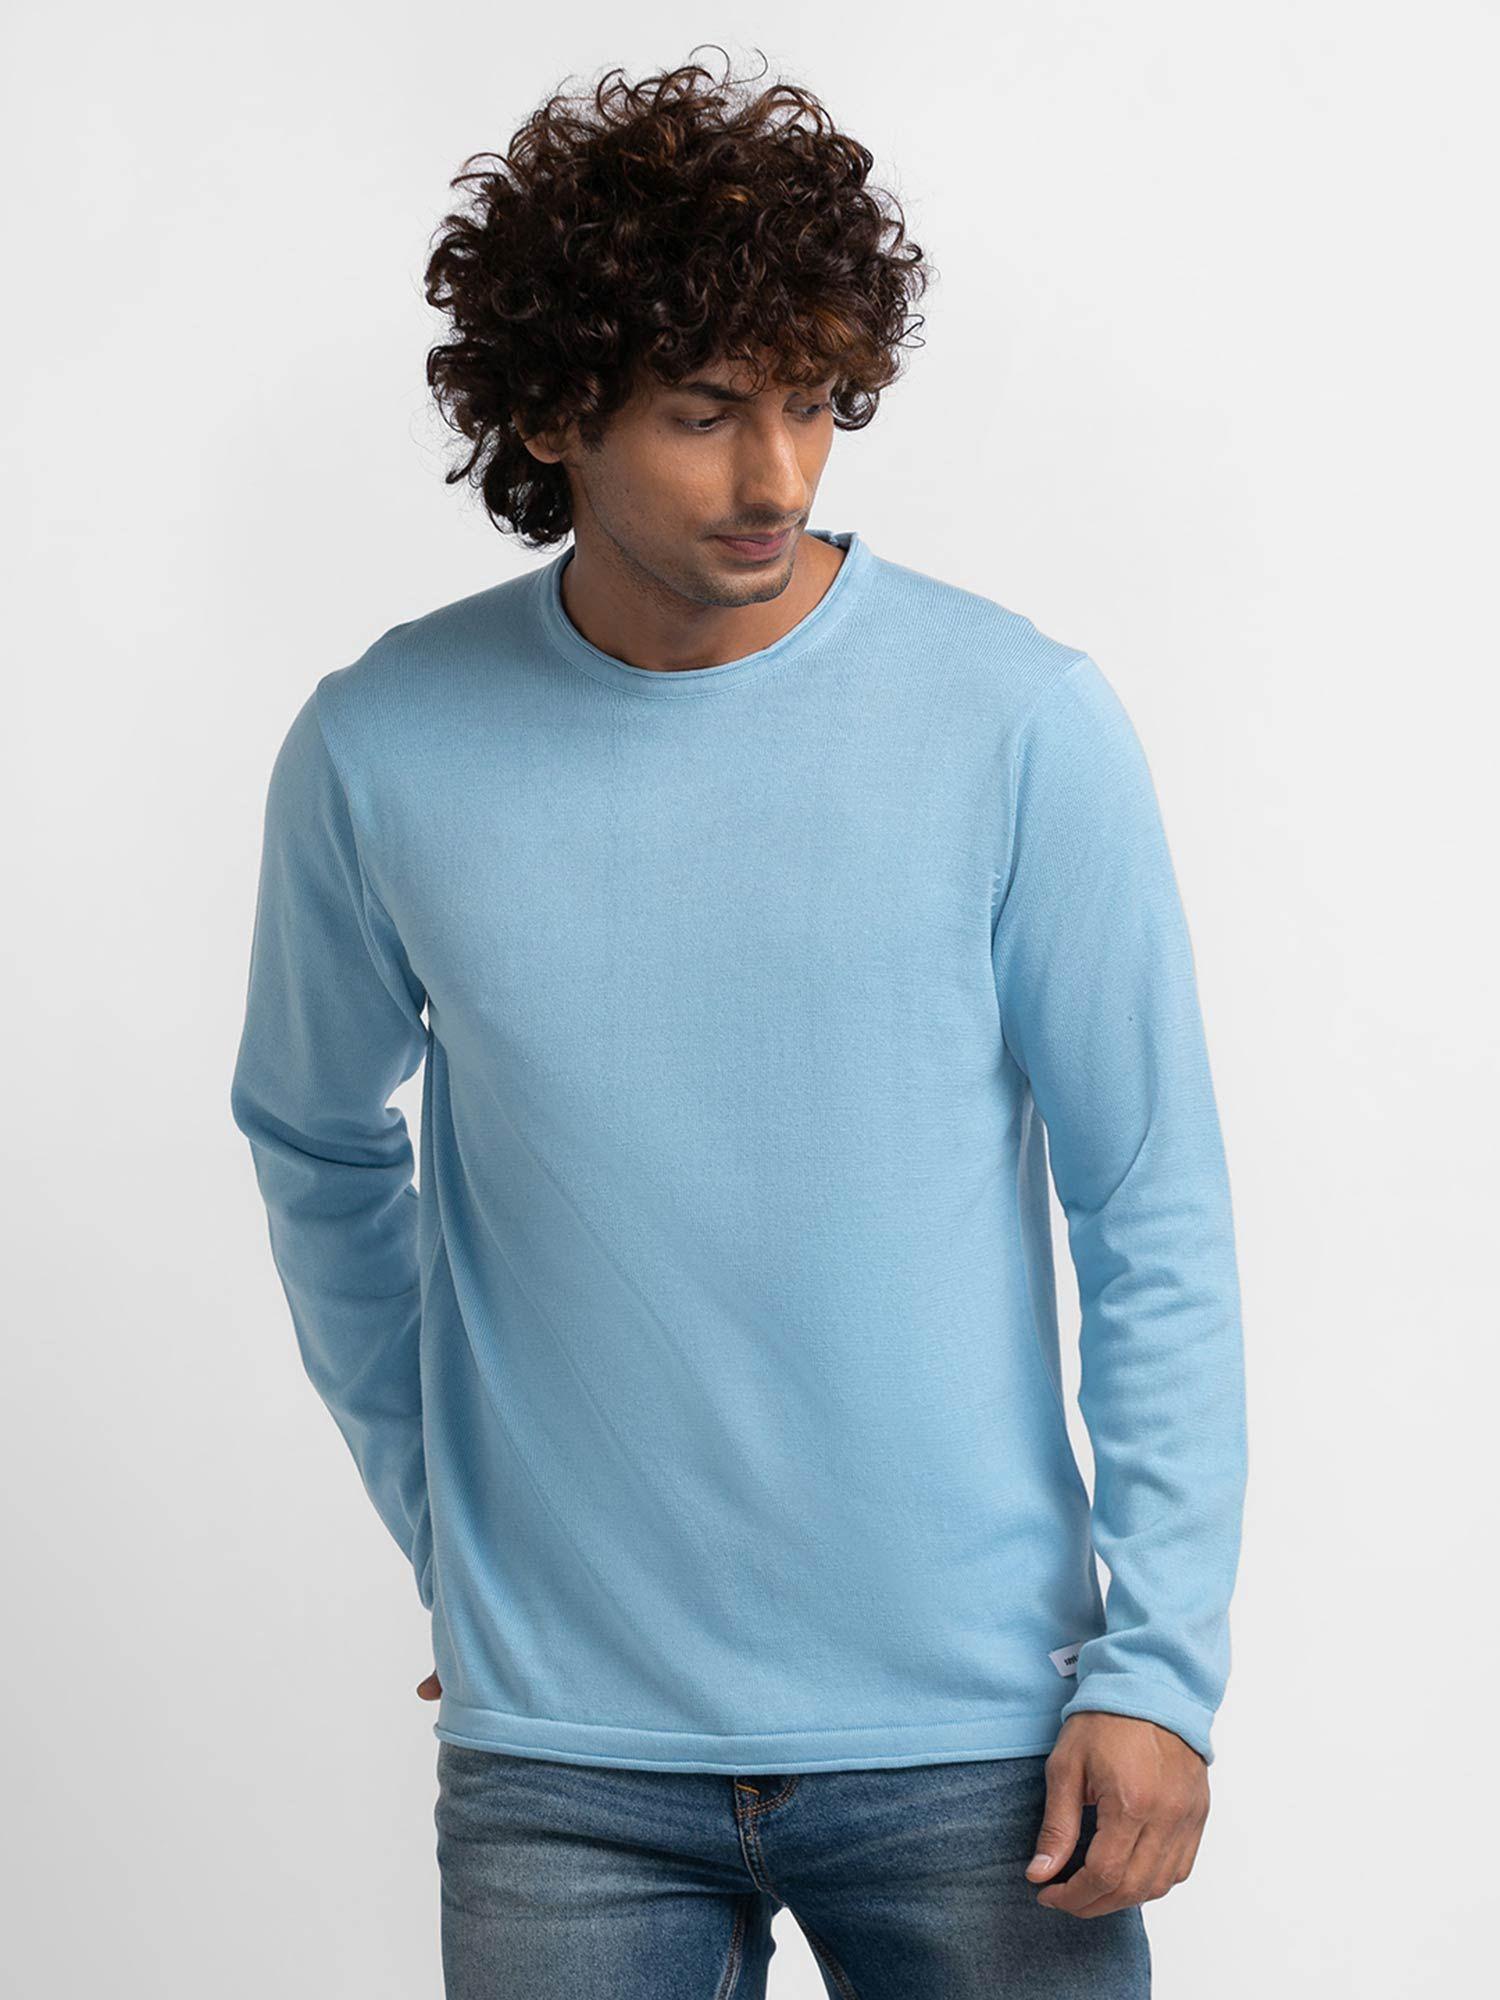 sky blue cotton full sleeve casual sweater for men